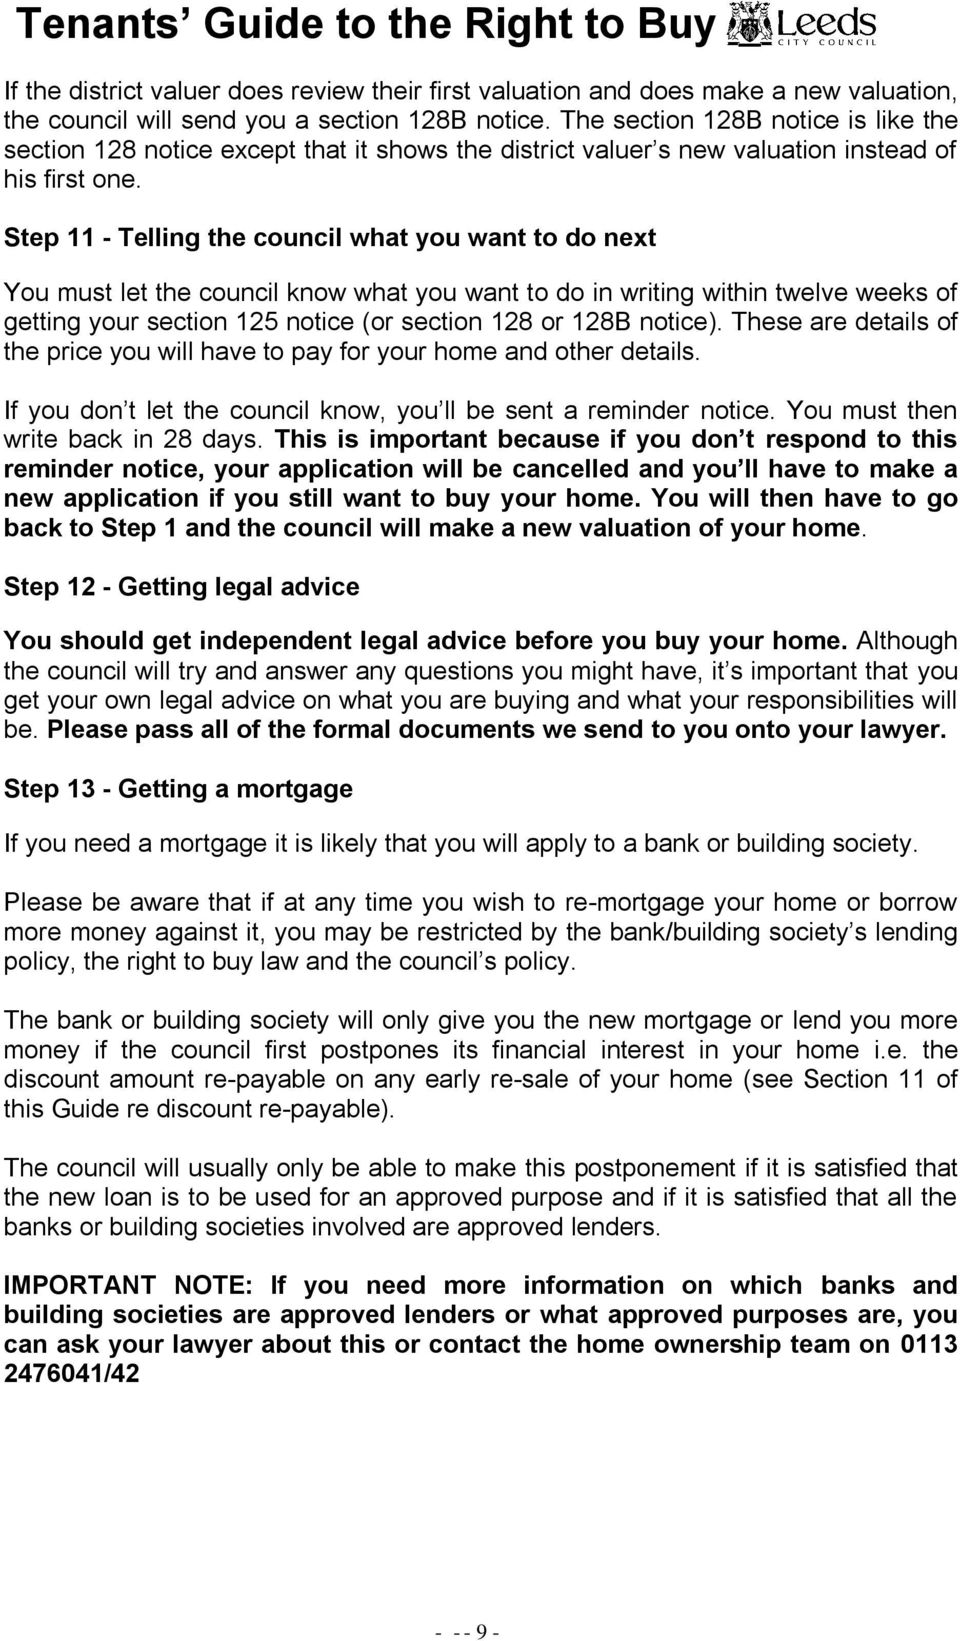 Step 11 - Telling the council what you want to do next You must let the council know what you want to do in writing within twelve weeks of getting your section 125 notice (or section 128 or 128B